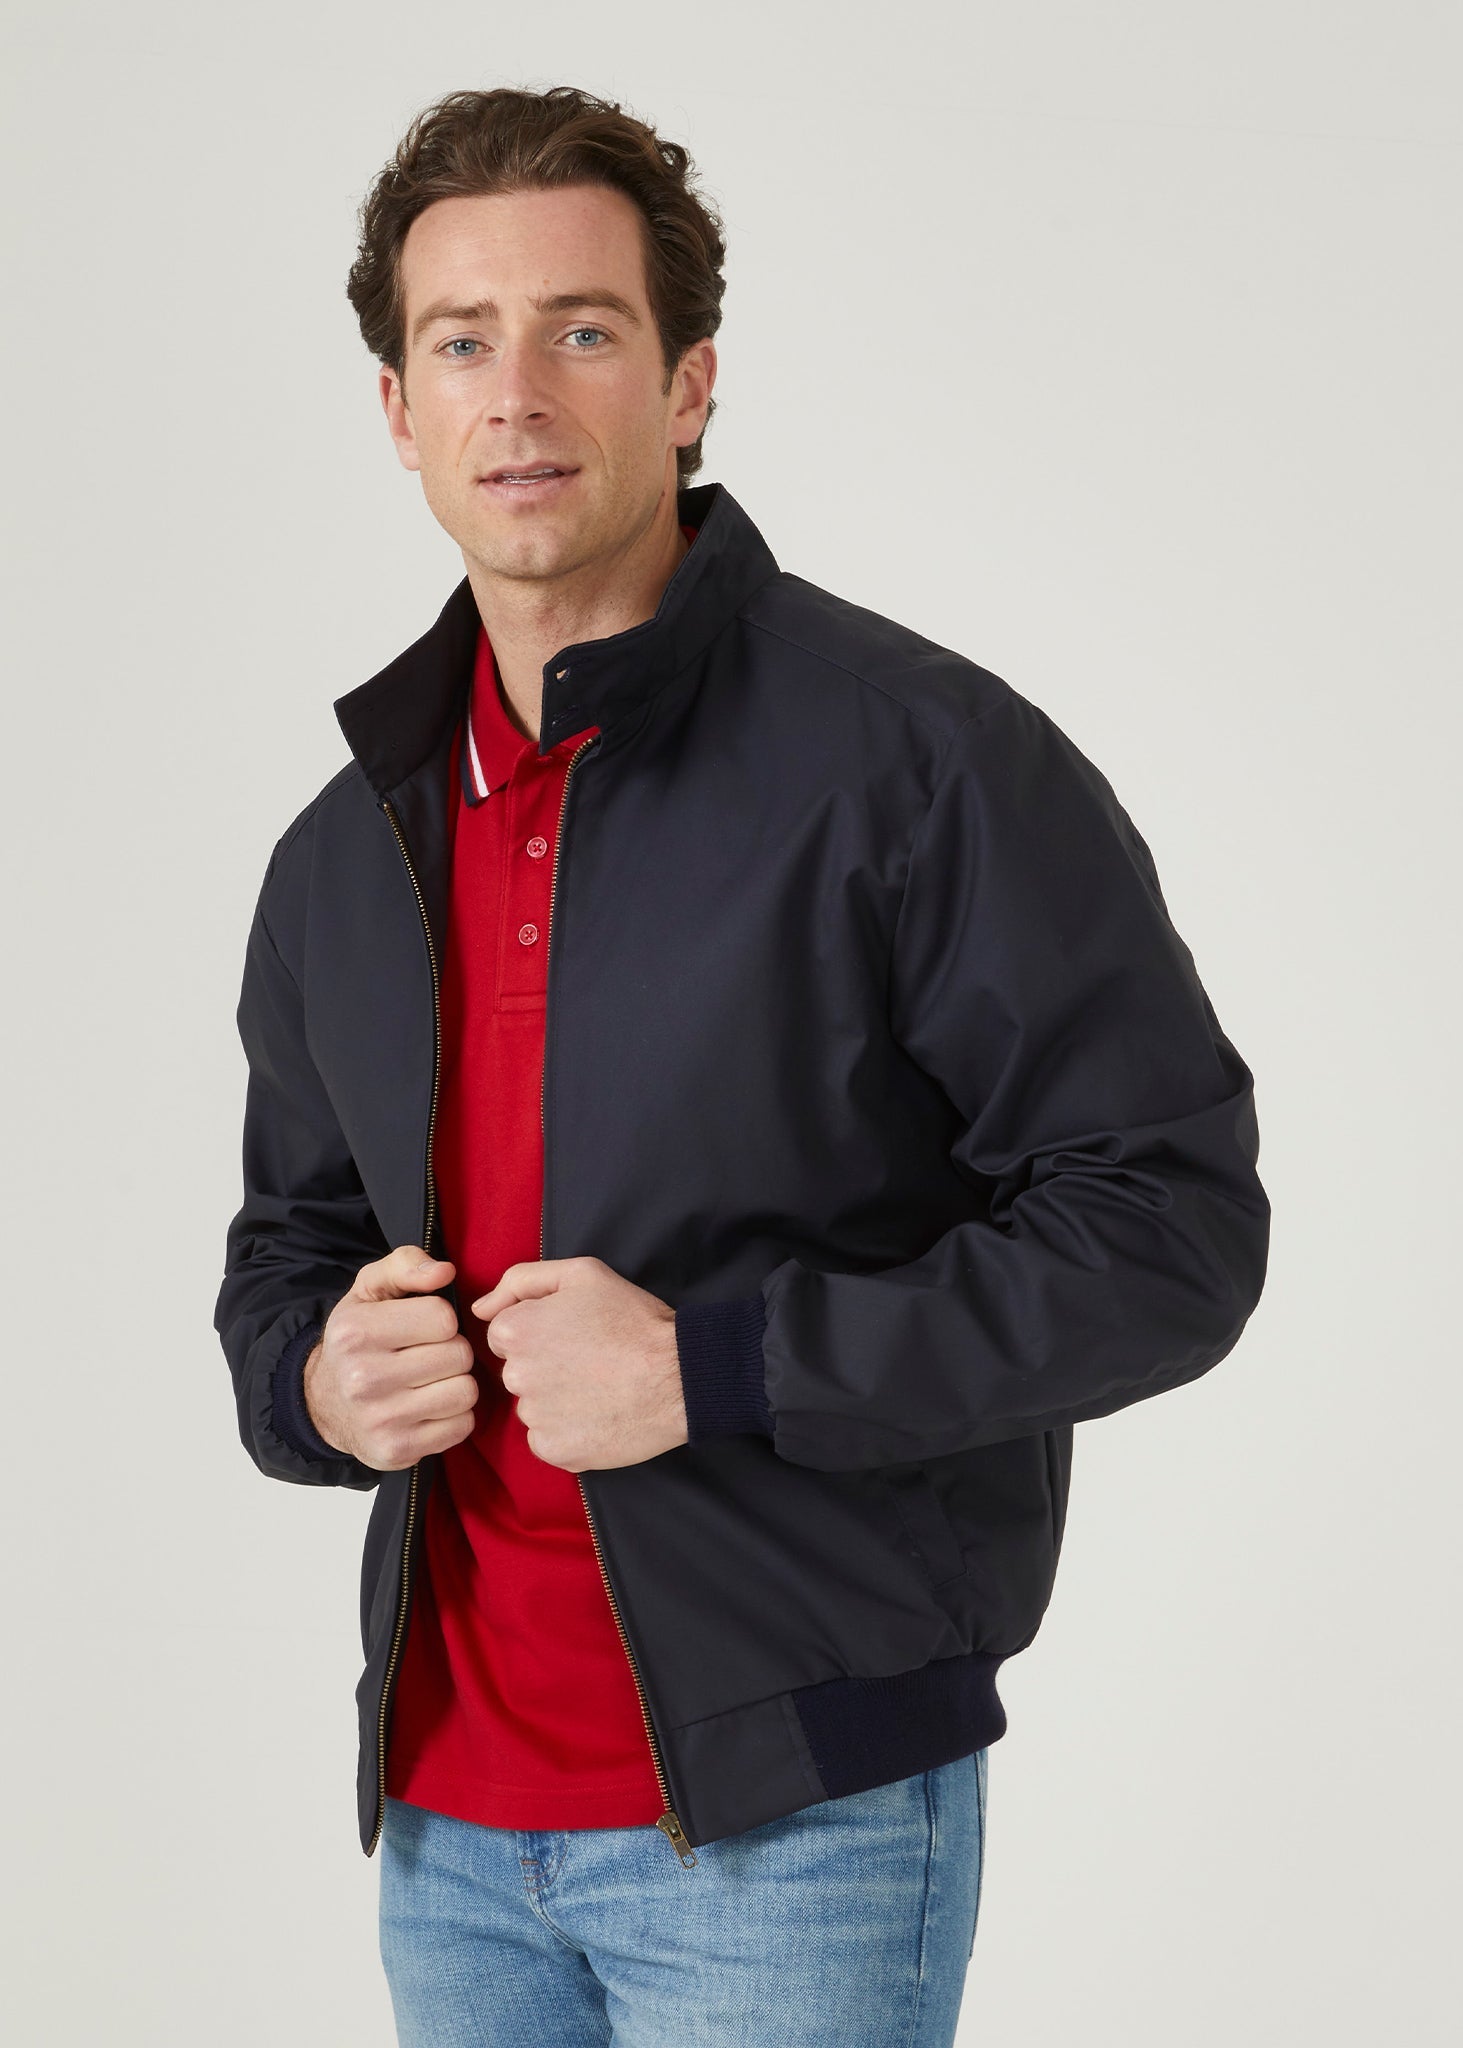 Cotton bomber jacket in navy from 100% cotton.